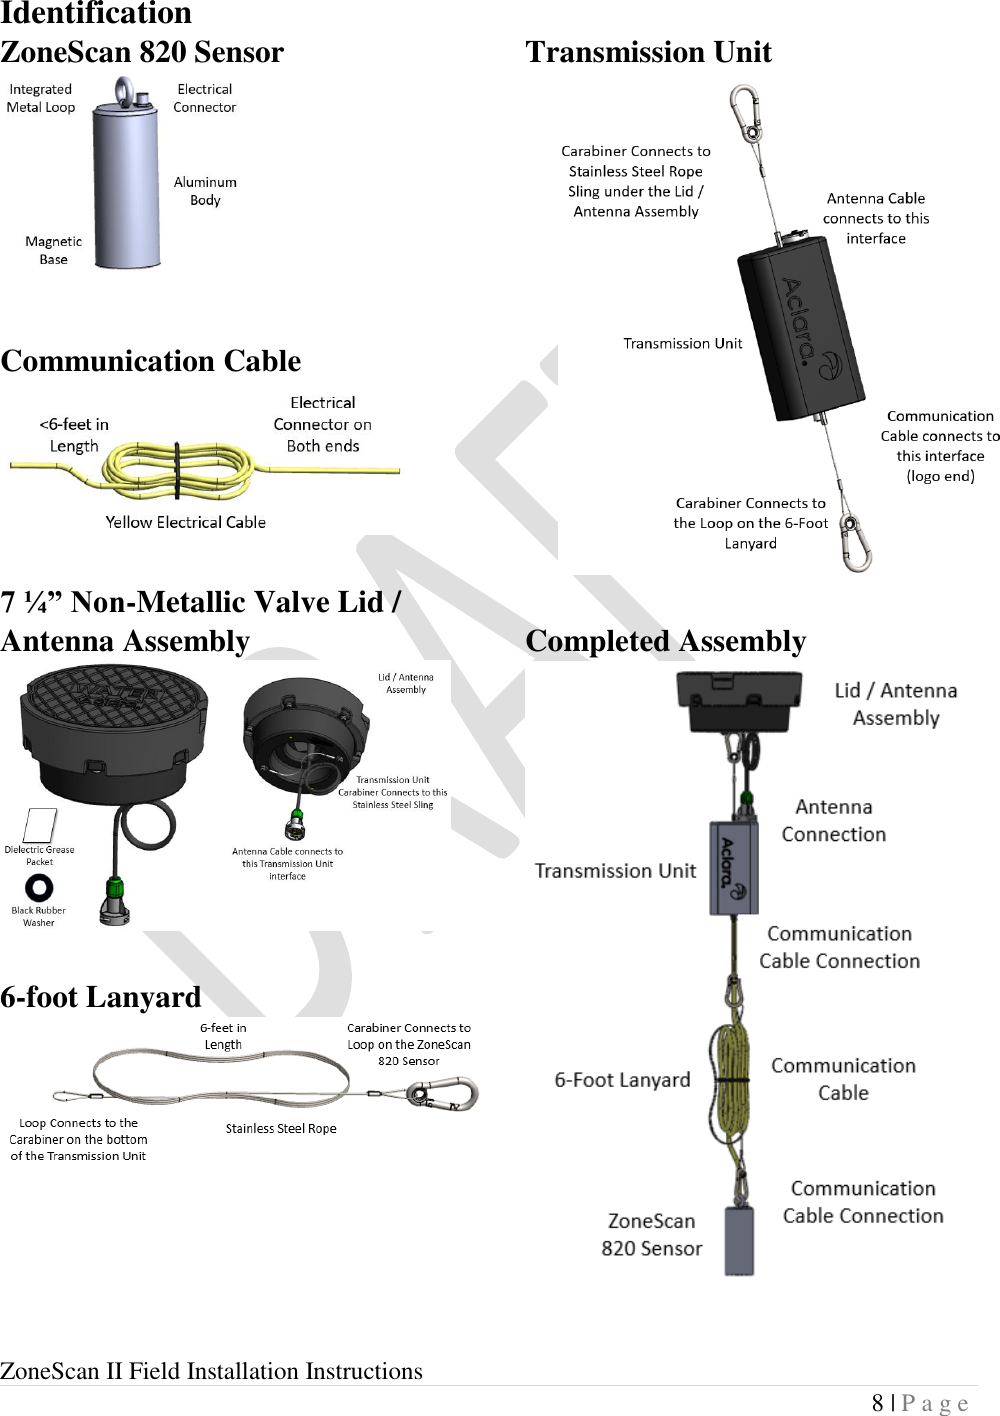  ZoneScan II Field Installation Instructions 8 | P a g e  Identification ZoneScan 820 Sensor   Communication Cable  7 ¼” Non-Metallic Valve Lid / Antenna Assembly  6-foot Lanyard     Transmission Unit  Completed Assembly   